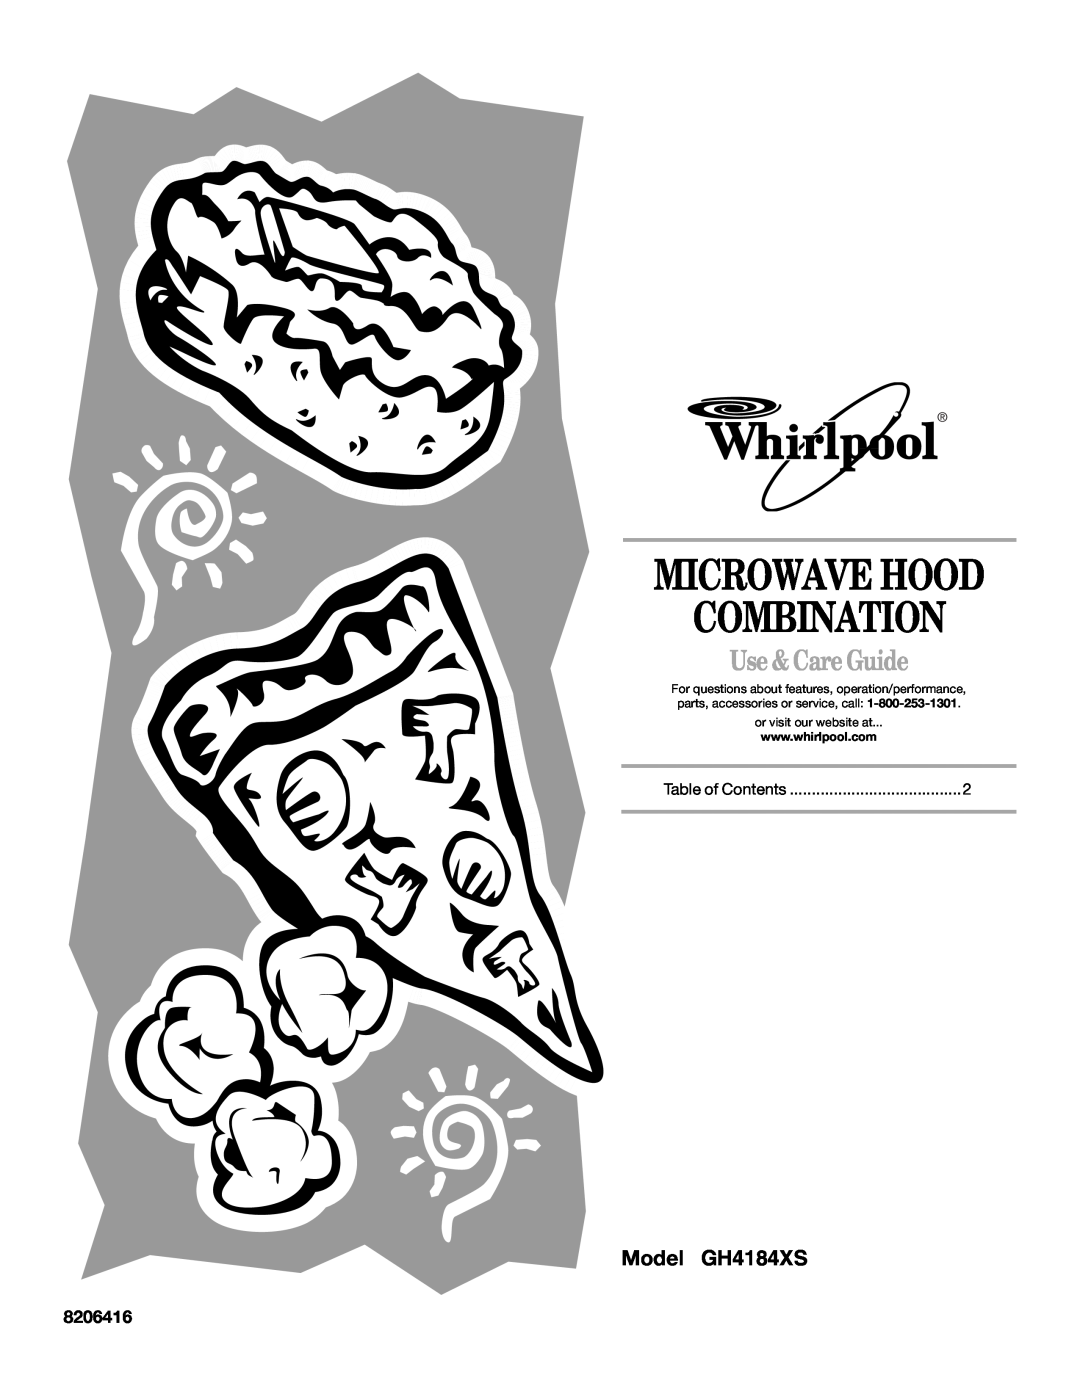 Whirlpool manual Model GH4184XS, Microwave Hood Combination, Use & Care Guide, or visit our website at 